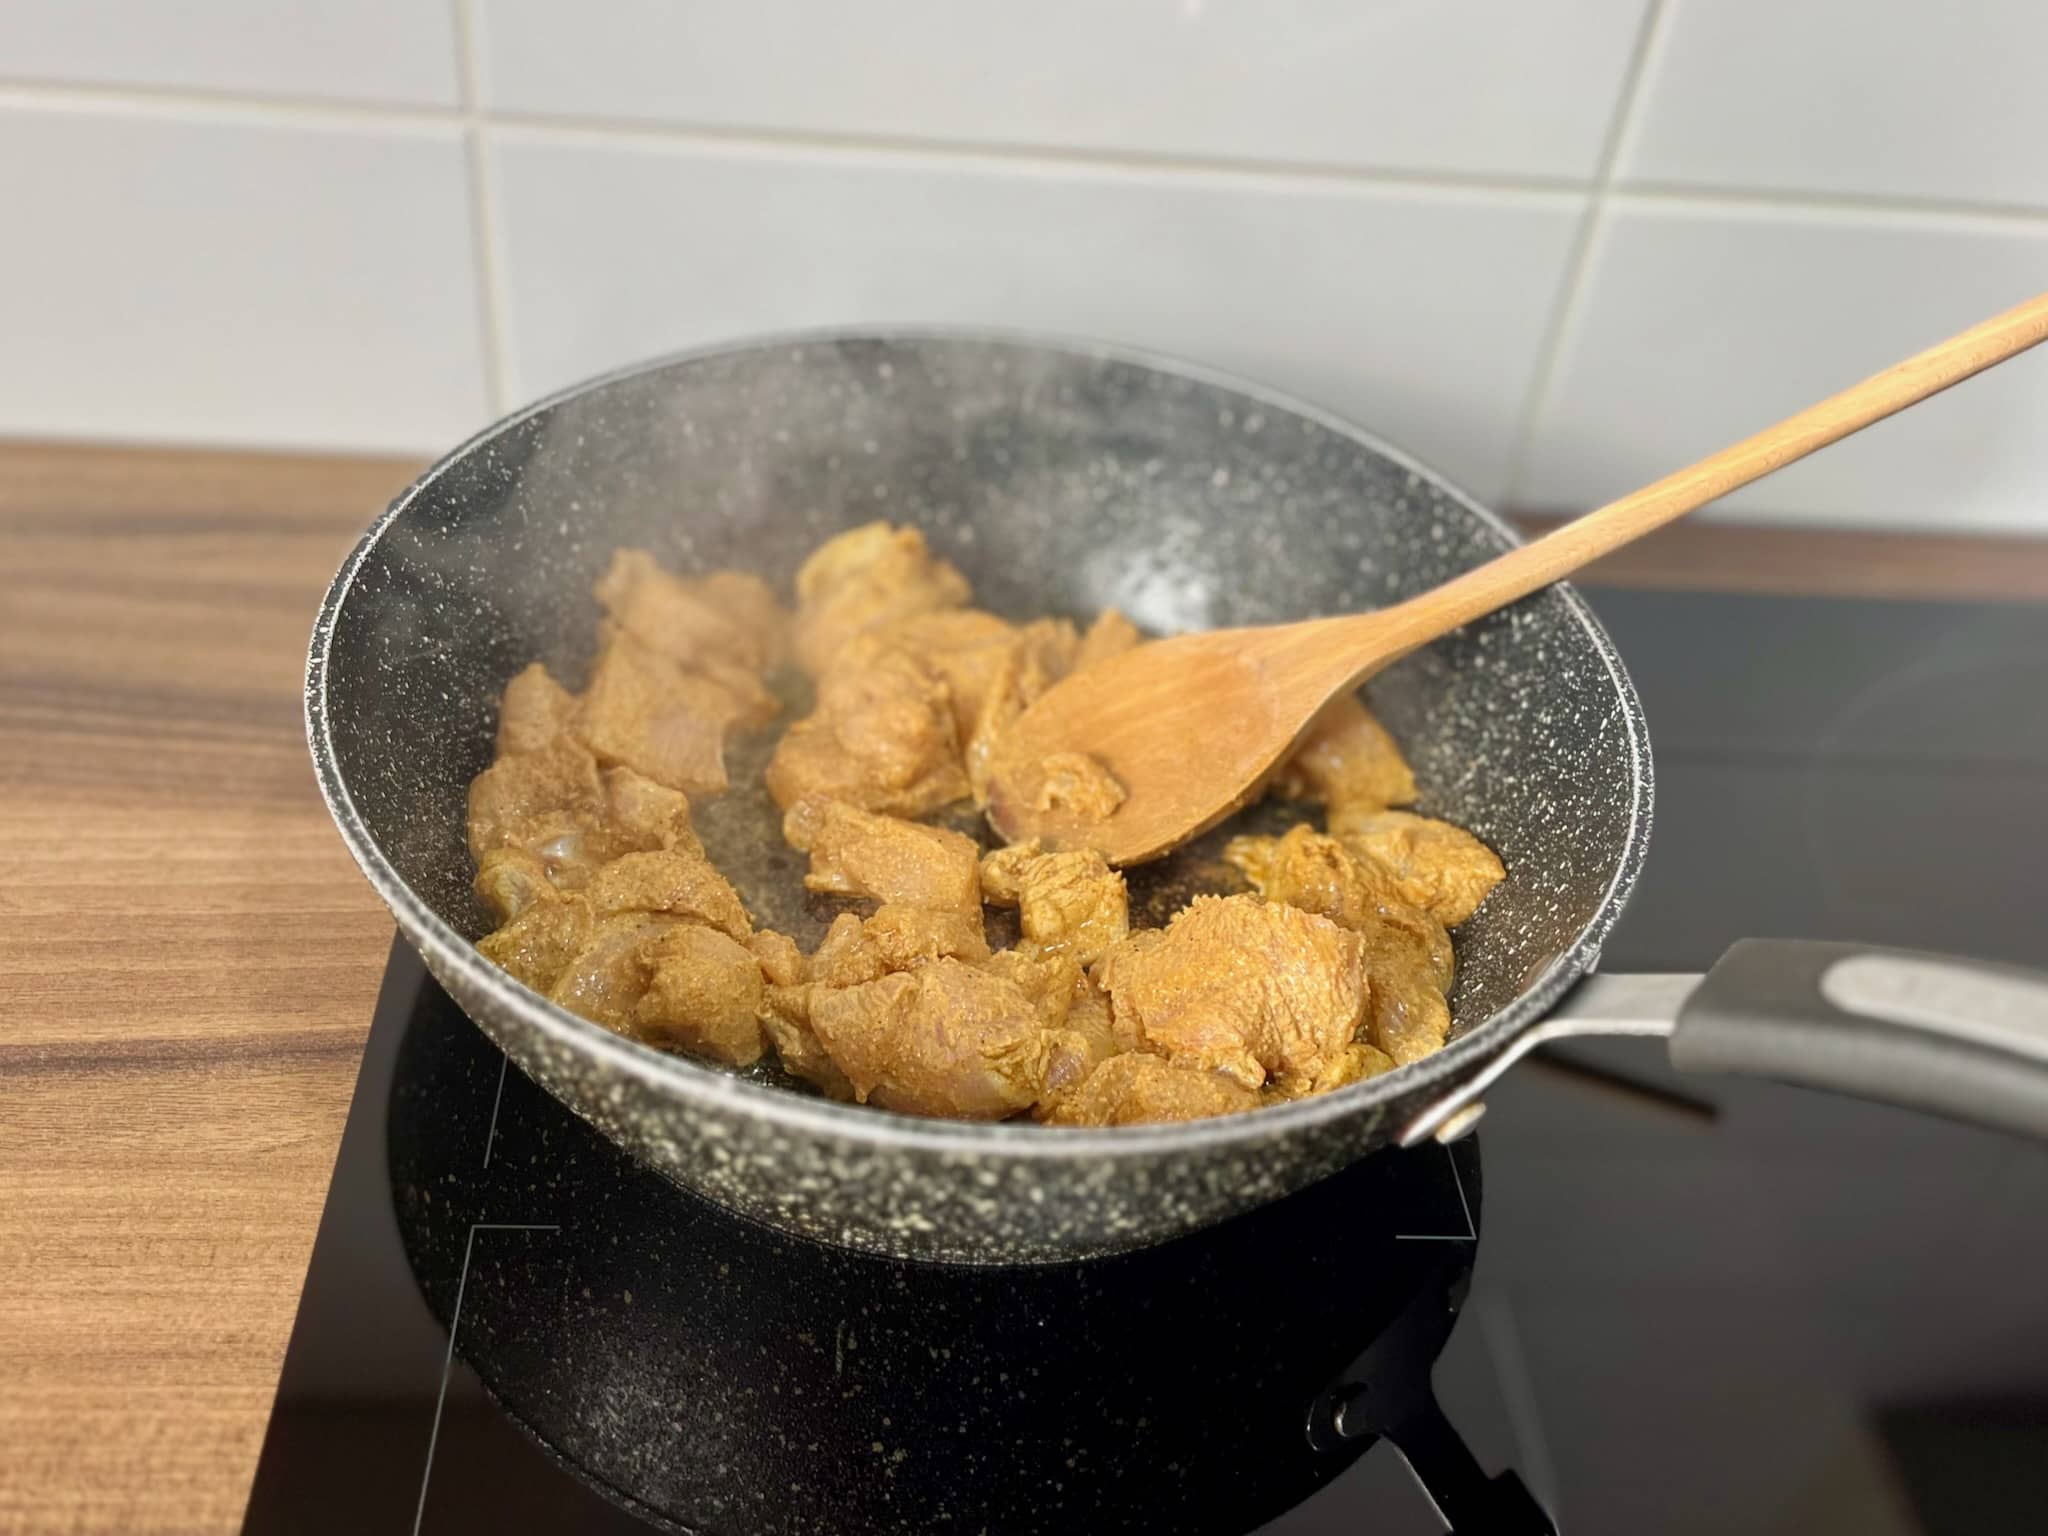 Cooking marinated chicken in a frying pan